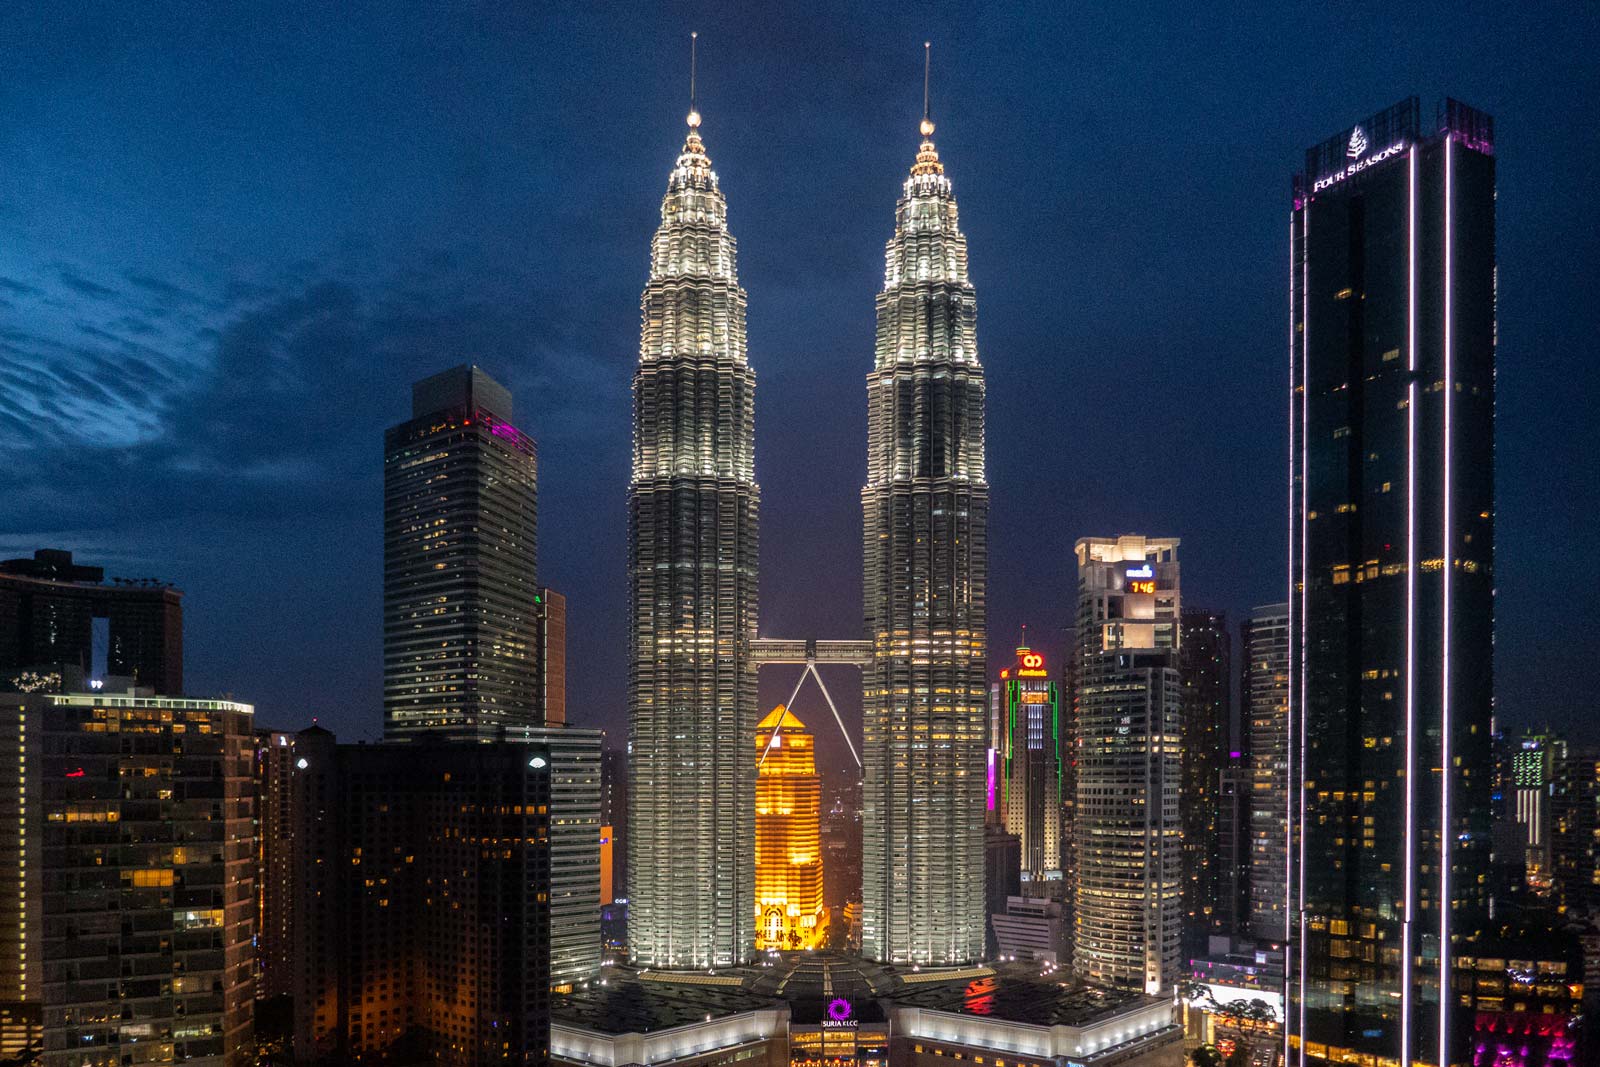 view of the Petronas Towers from the Skybar inside Traders Hotel in Kuala Lumpur